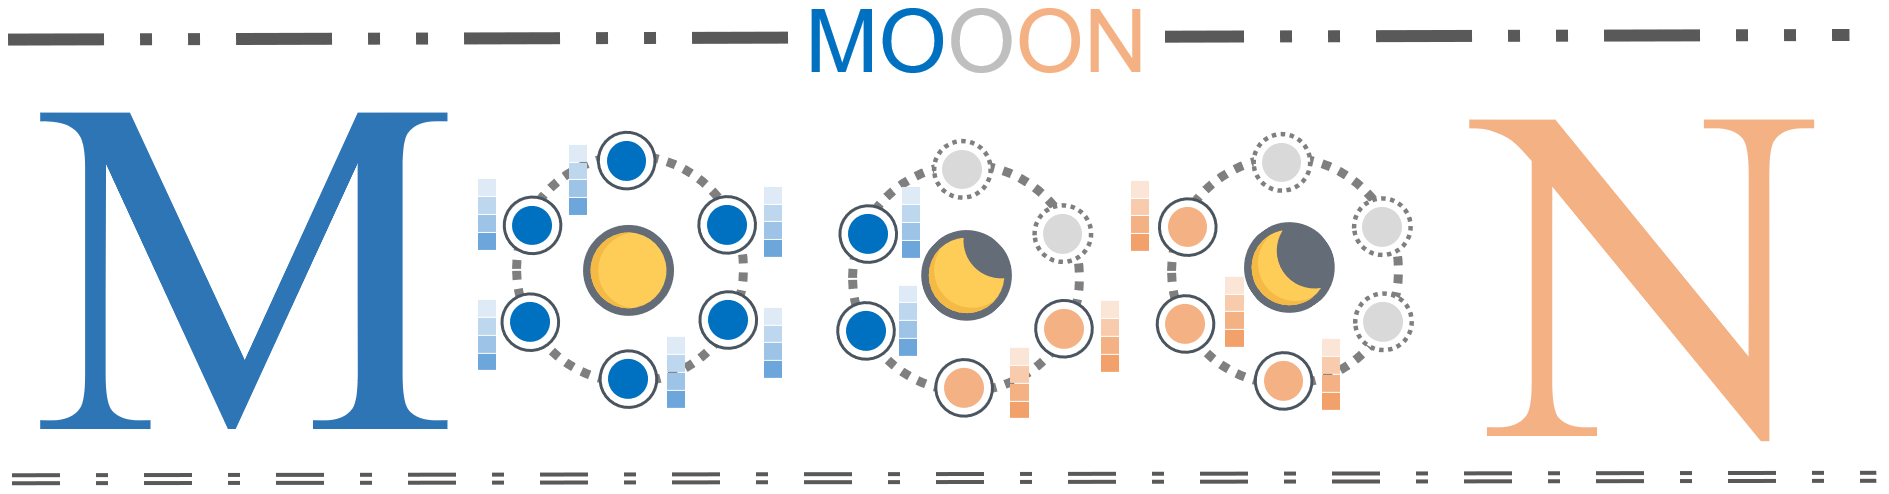 _images/mooon.png